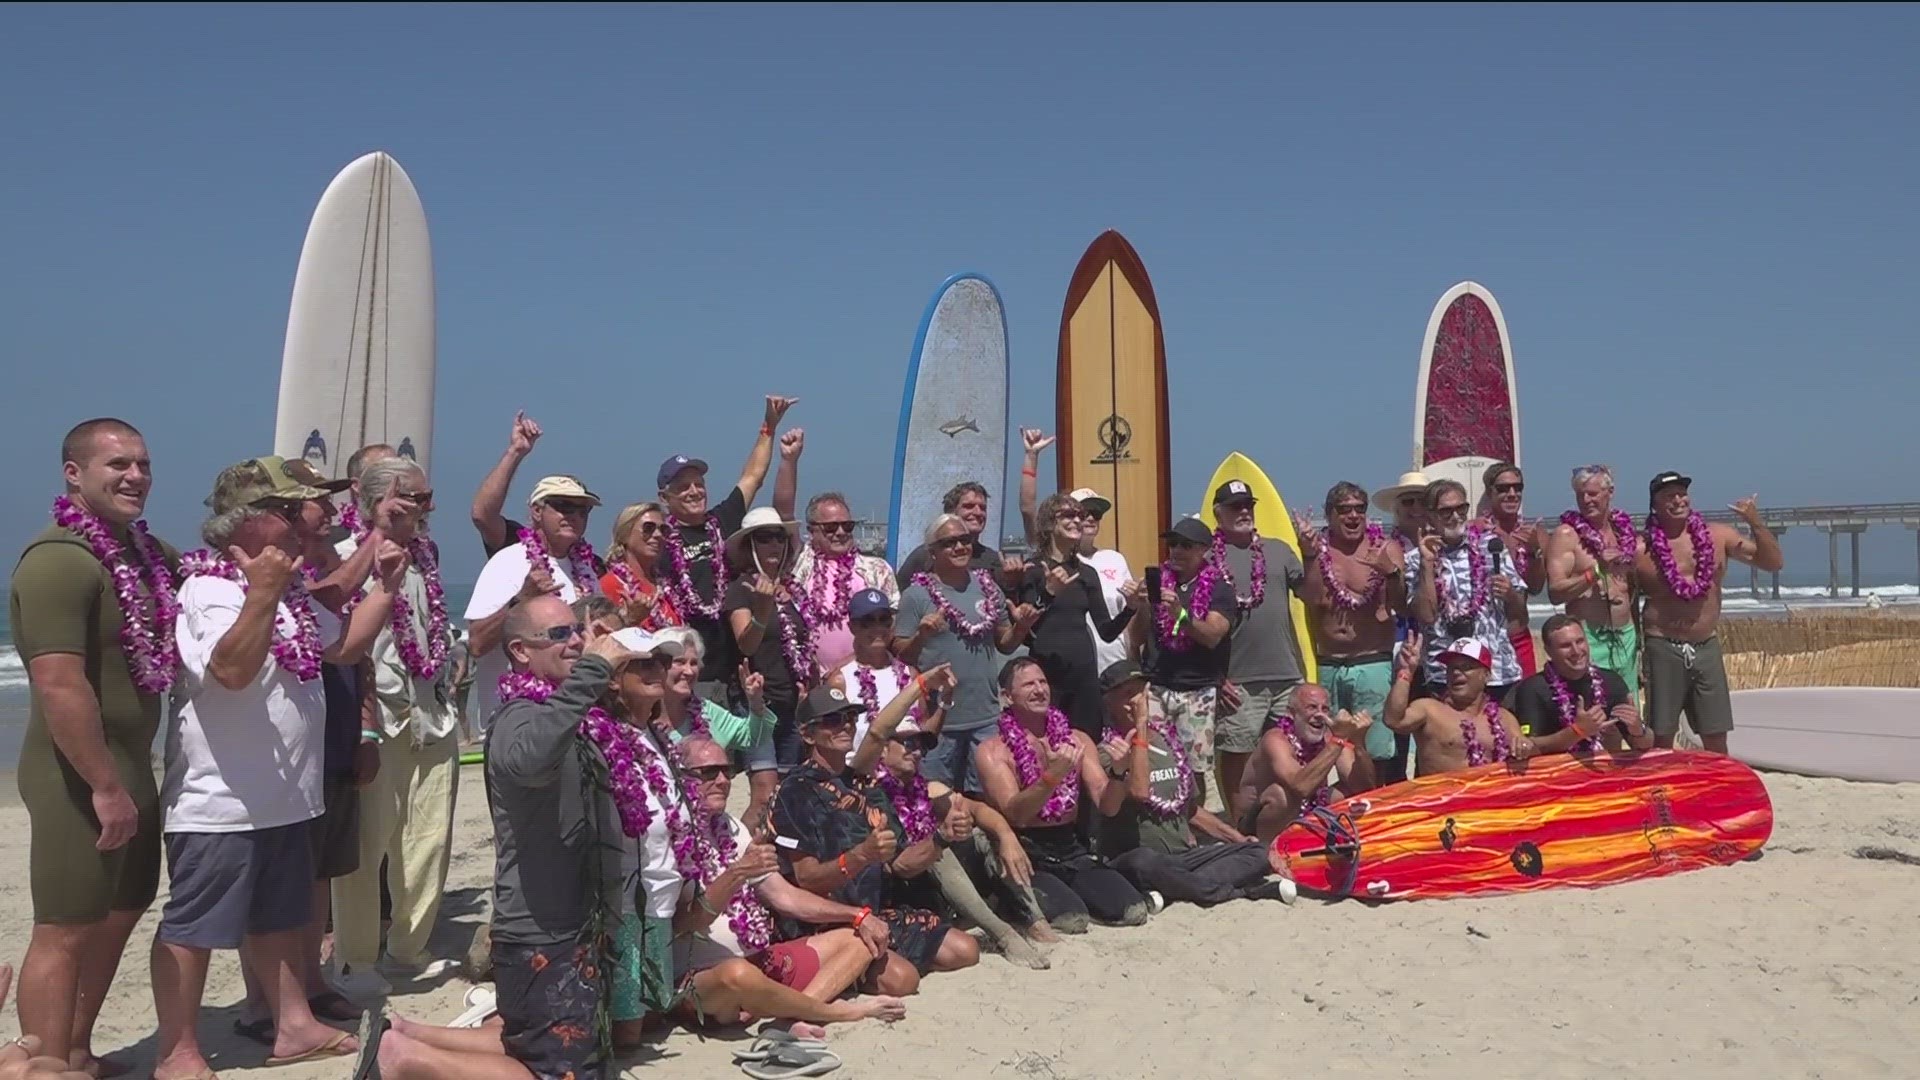 The Luau & Legends Surfing Invitational was held at Scripps Pier Beach and Scripps Seaside Forum at Scripps Institution of Oceanography.